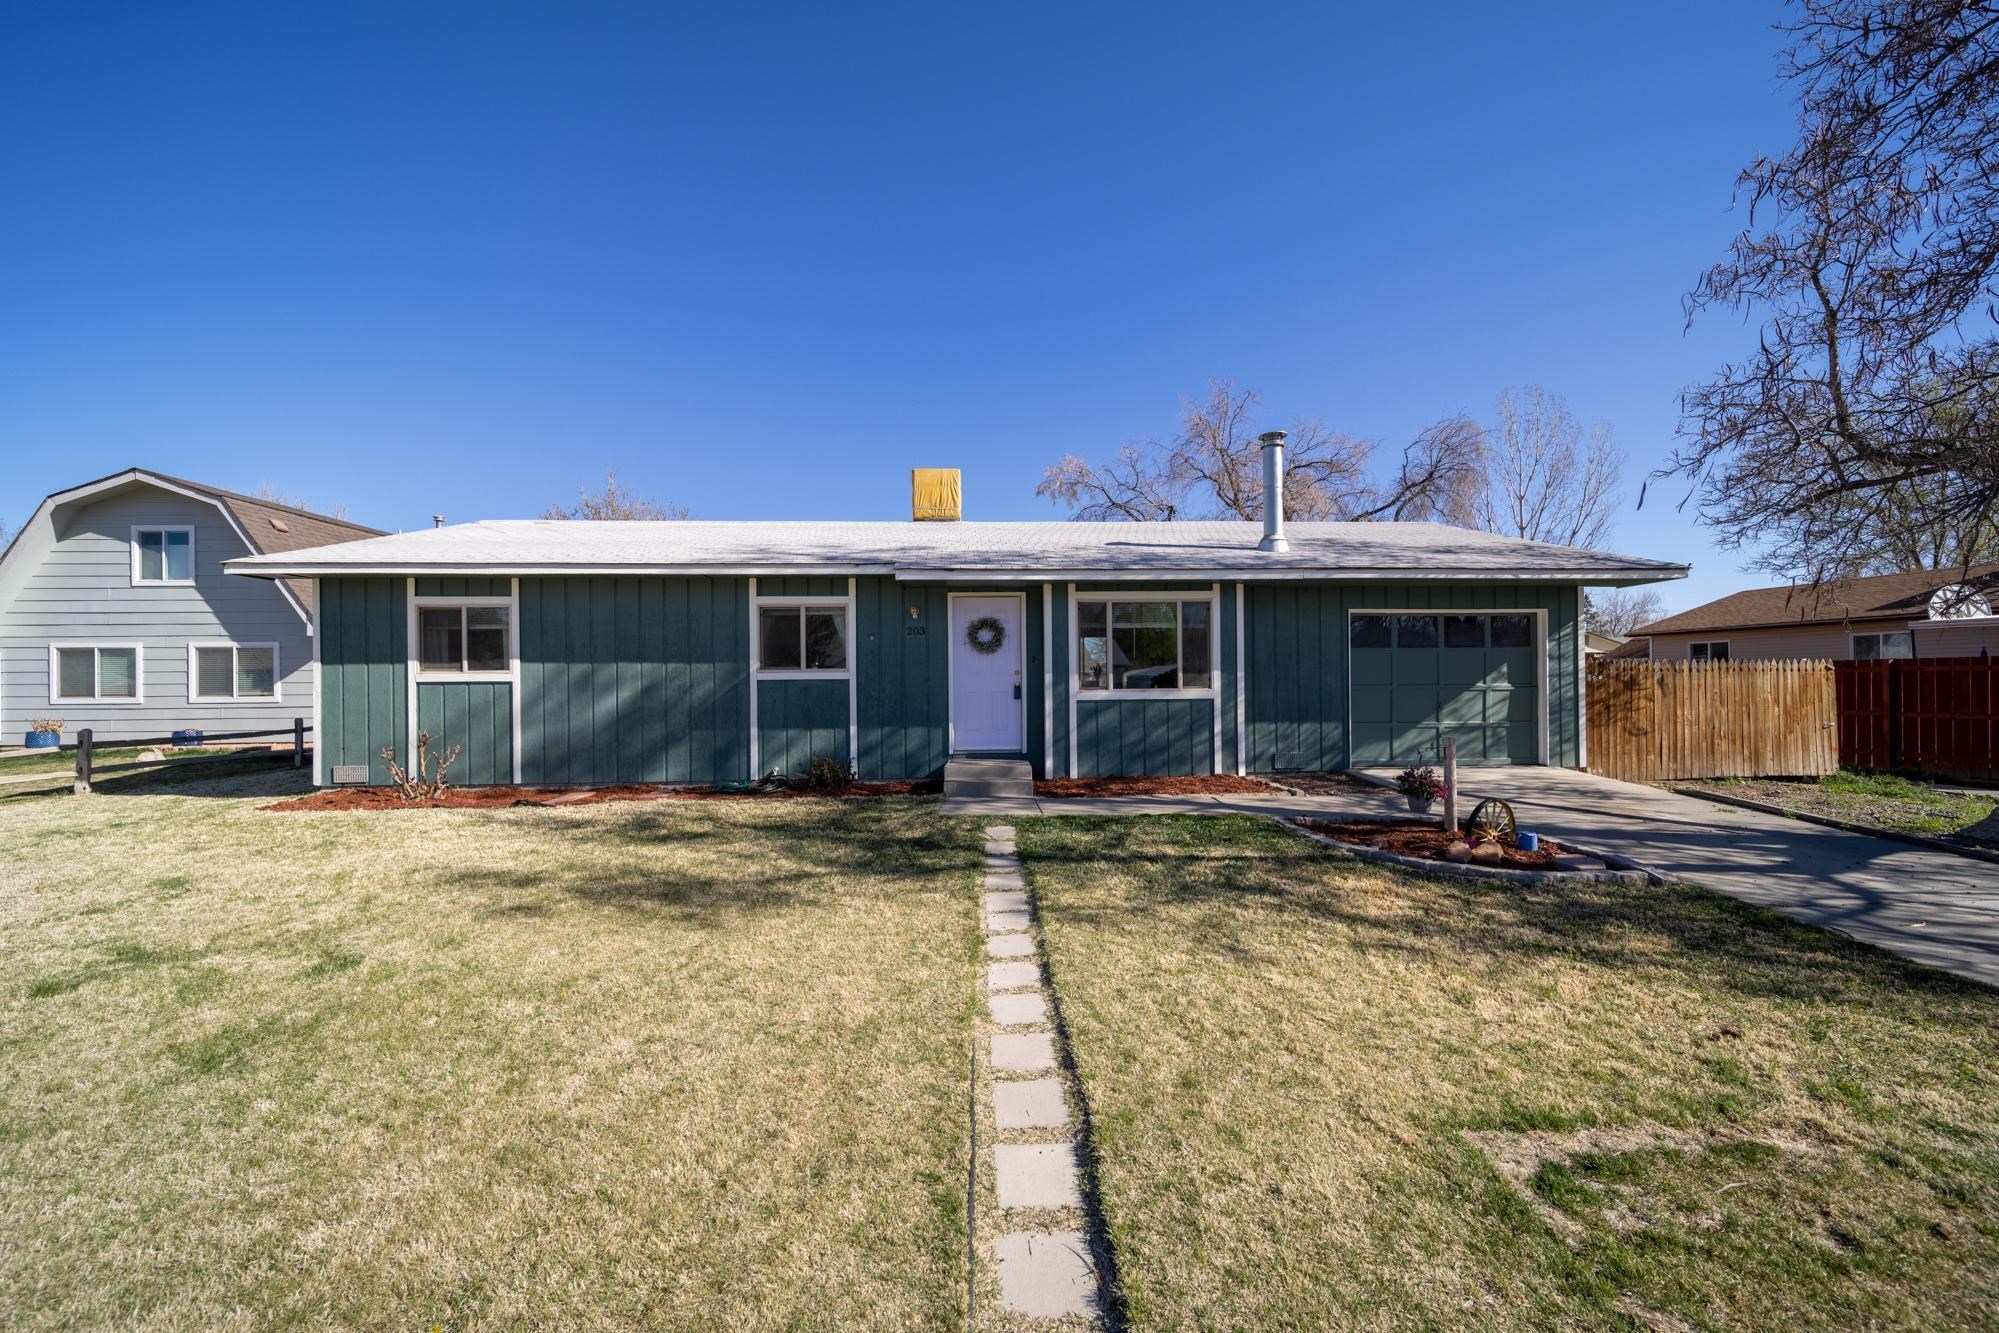 PRICE JUST REDUCED. 3 bedroom 1 bath home on a cul-de-sac in Fruita.   Established friendly neighborhood. Newly Painted. New appliances. Large Backyard with storage shed on irrigation water.  Adjacent to bike path. Great Home!